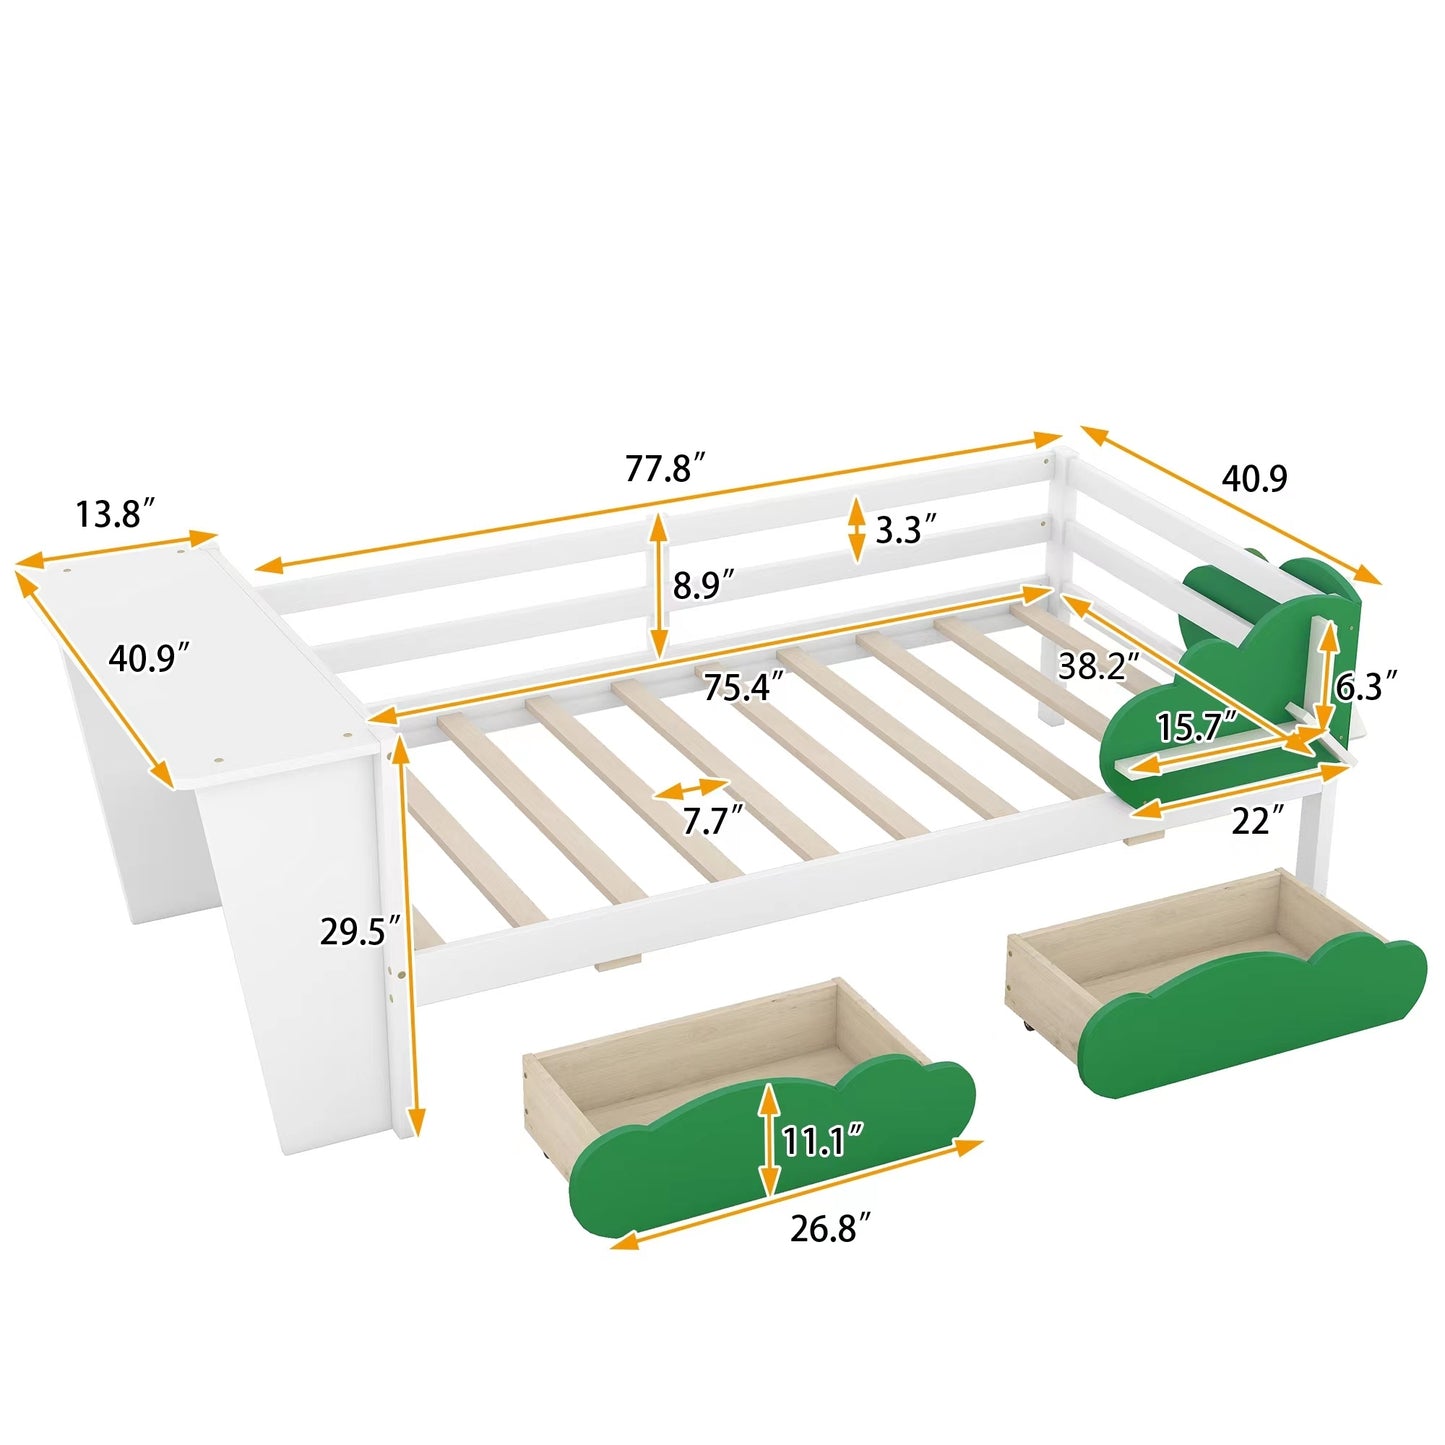 Twin Size Daybed with Desk, Green Leaf Shape Drawers and Shelves, White